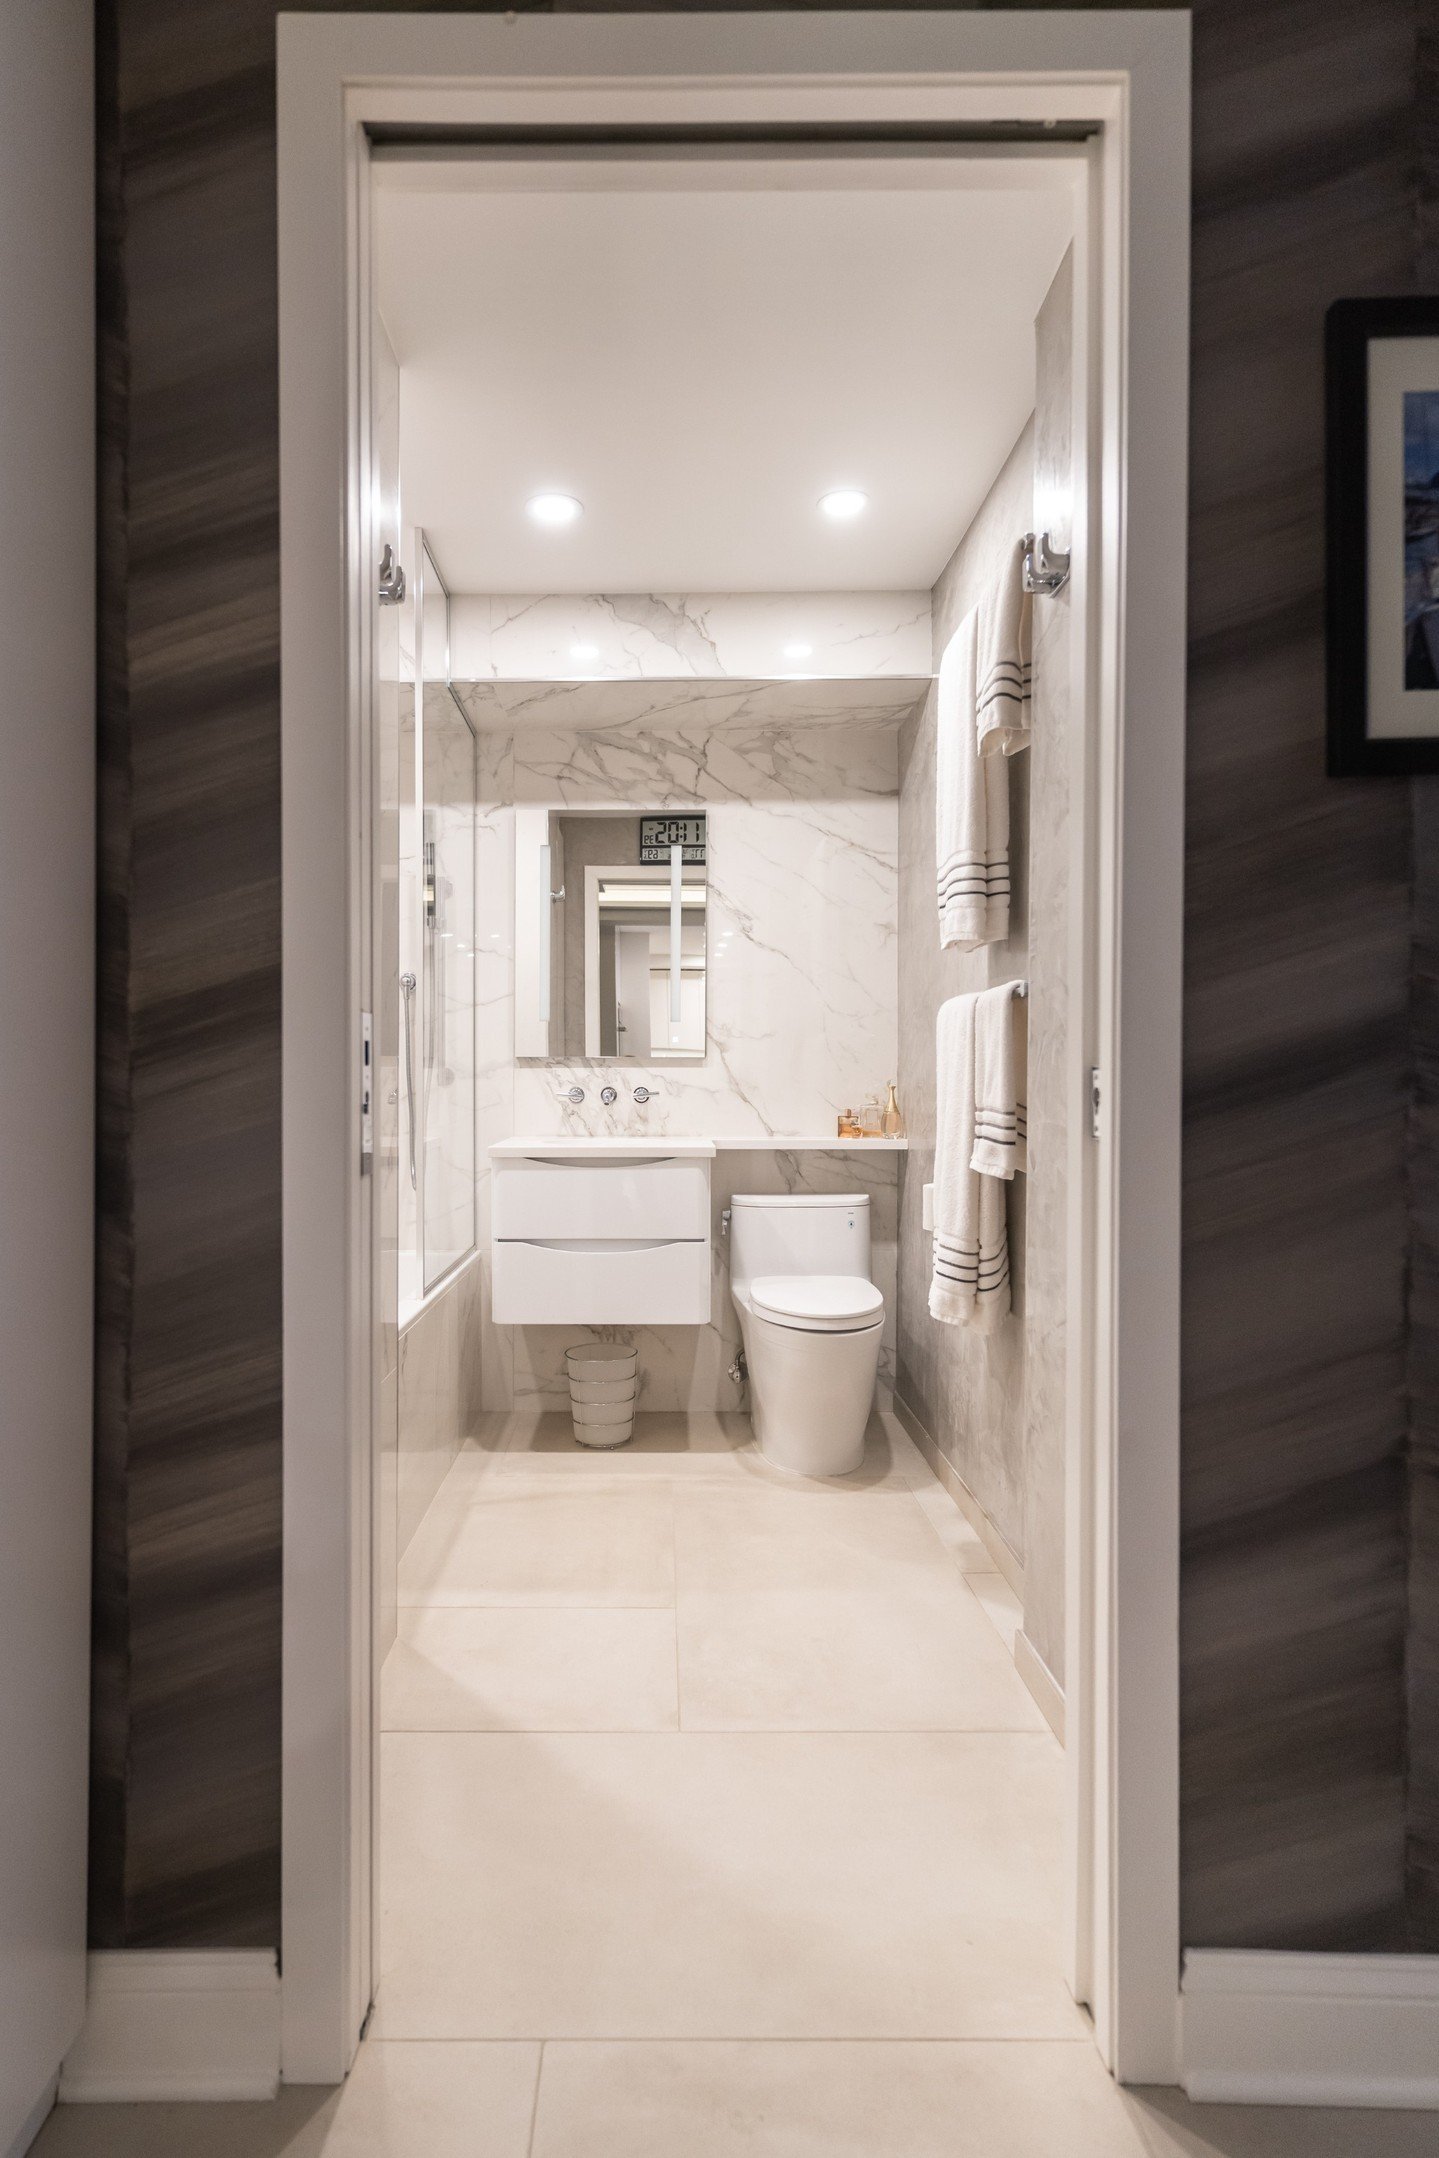 Revealing a transformation this Thursday with one of our favorite bathroom renovations! ✨

Say hello to a space that's gone from basic to breathtaking. We're thrilled to share the stunning before-and-after of this project. Swipe to witness the magic!